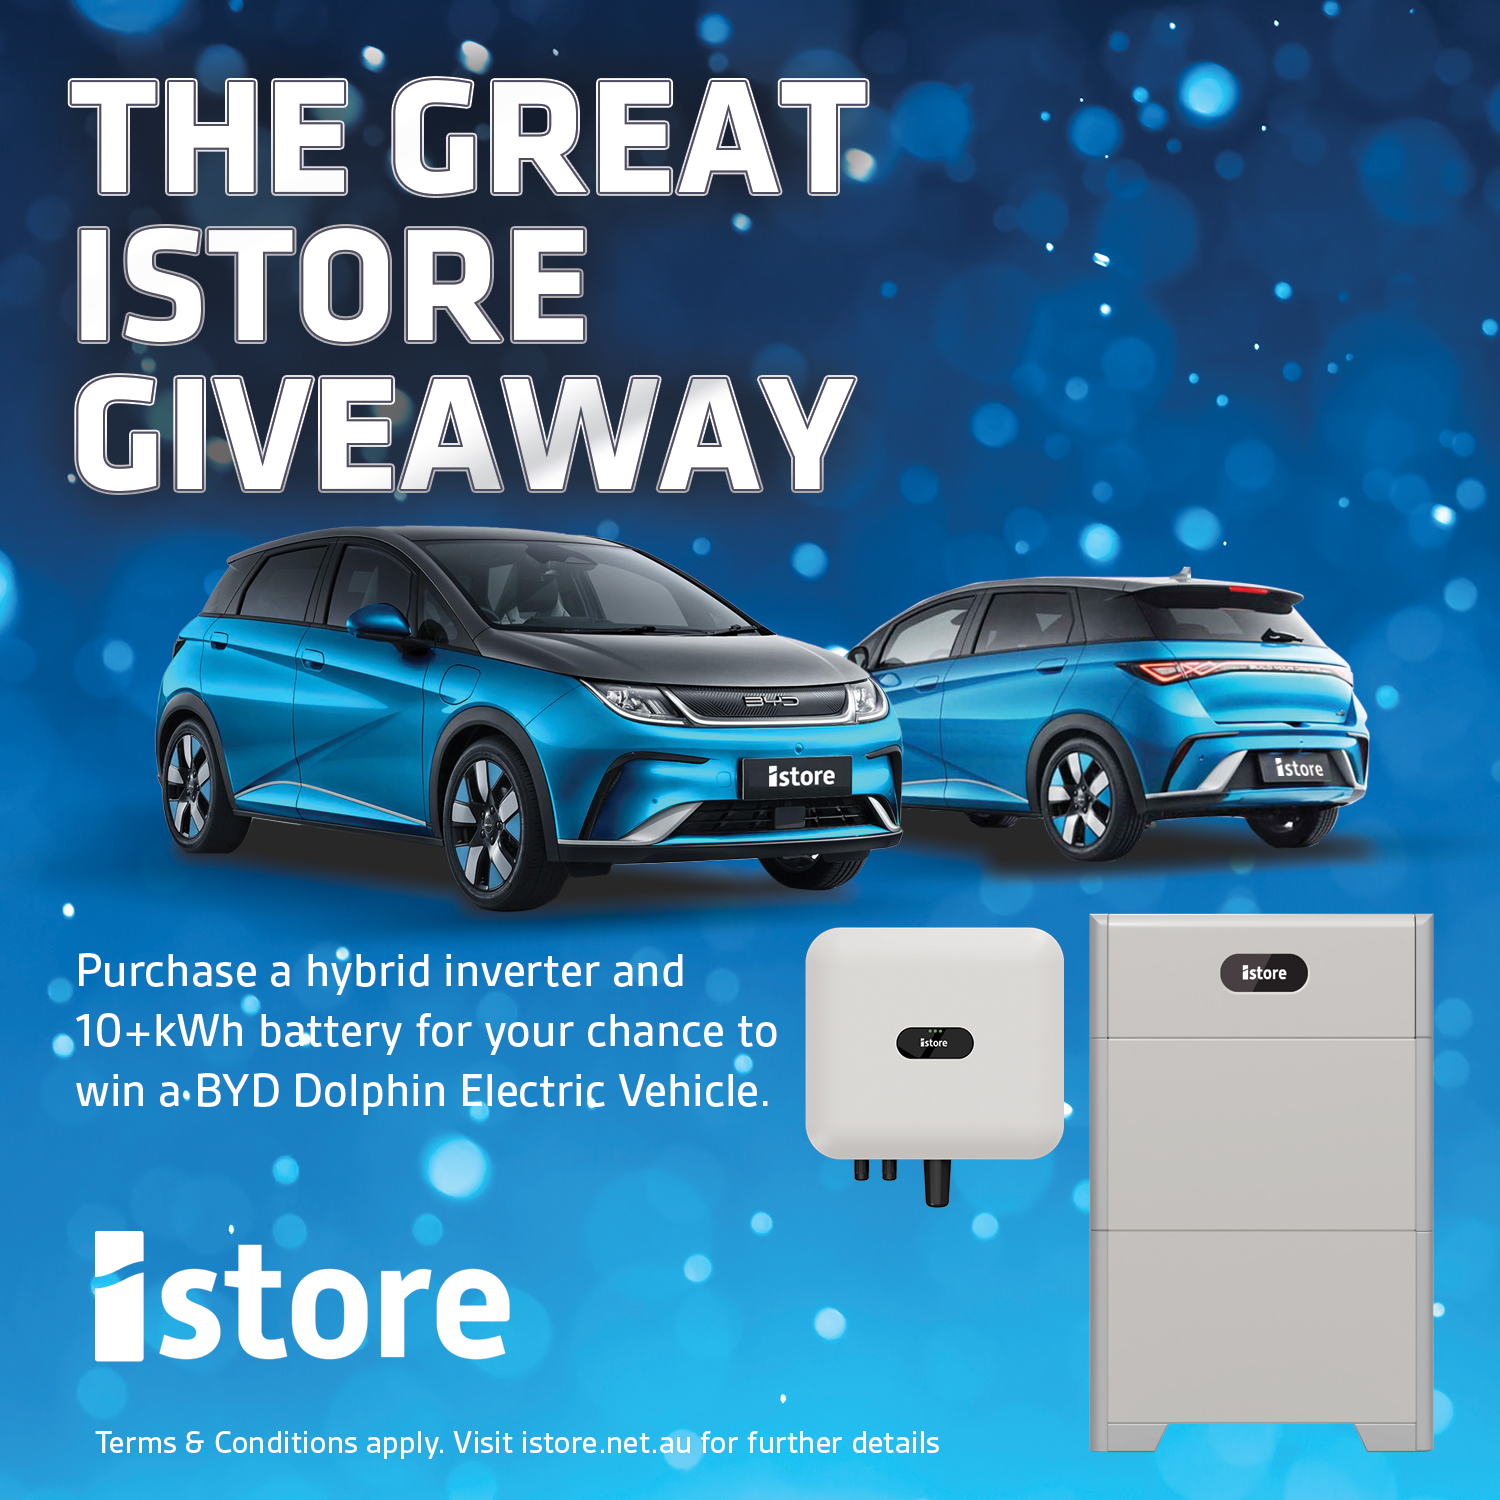 iStore Great Giveaway promotion featuring BYD Electric Cars.